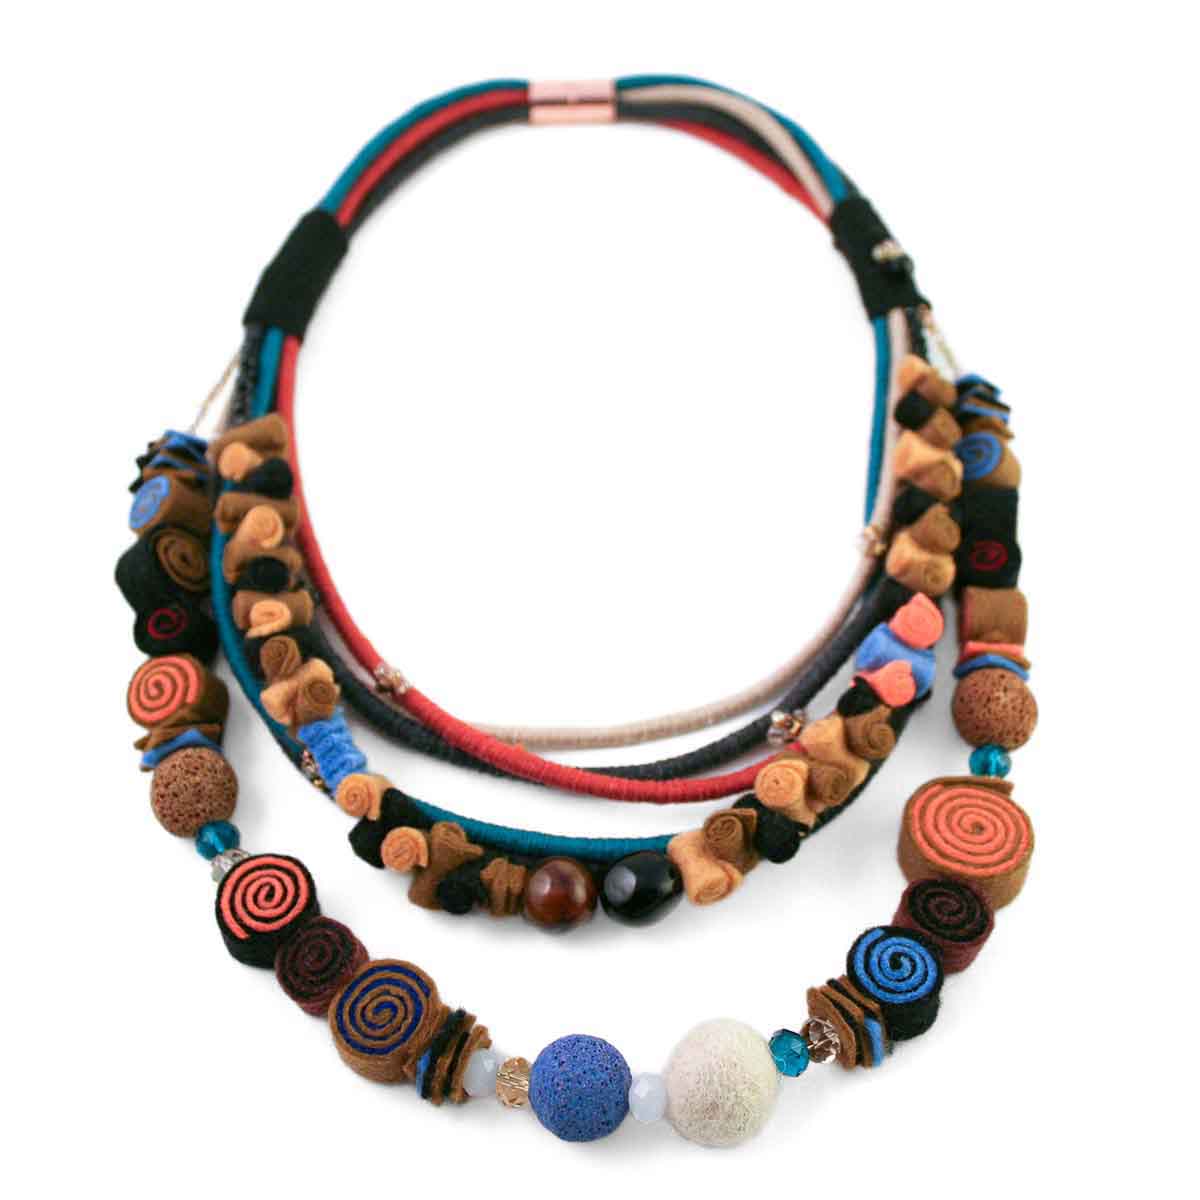 Statement felt necklace designed and made for Bead A Boo by katerina Glinou.